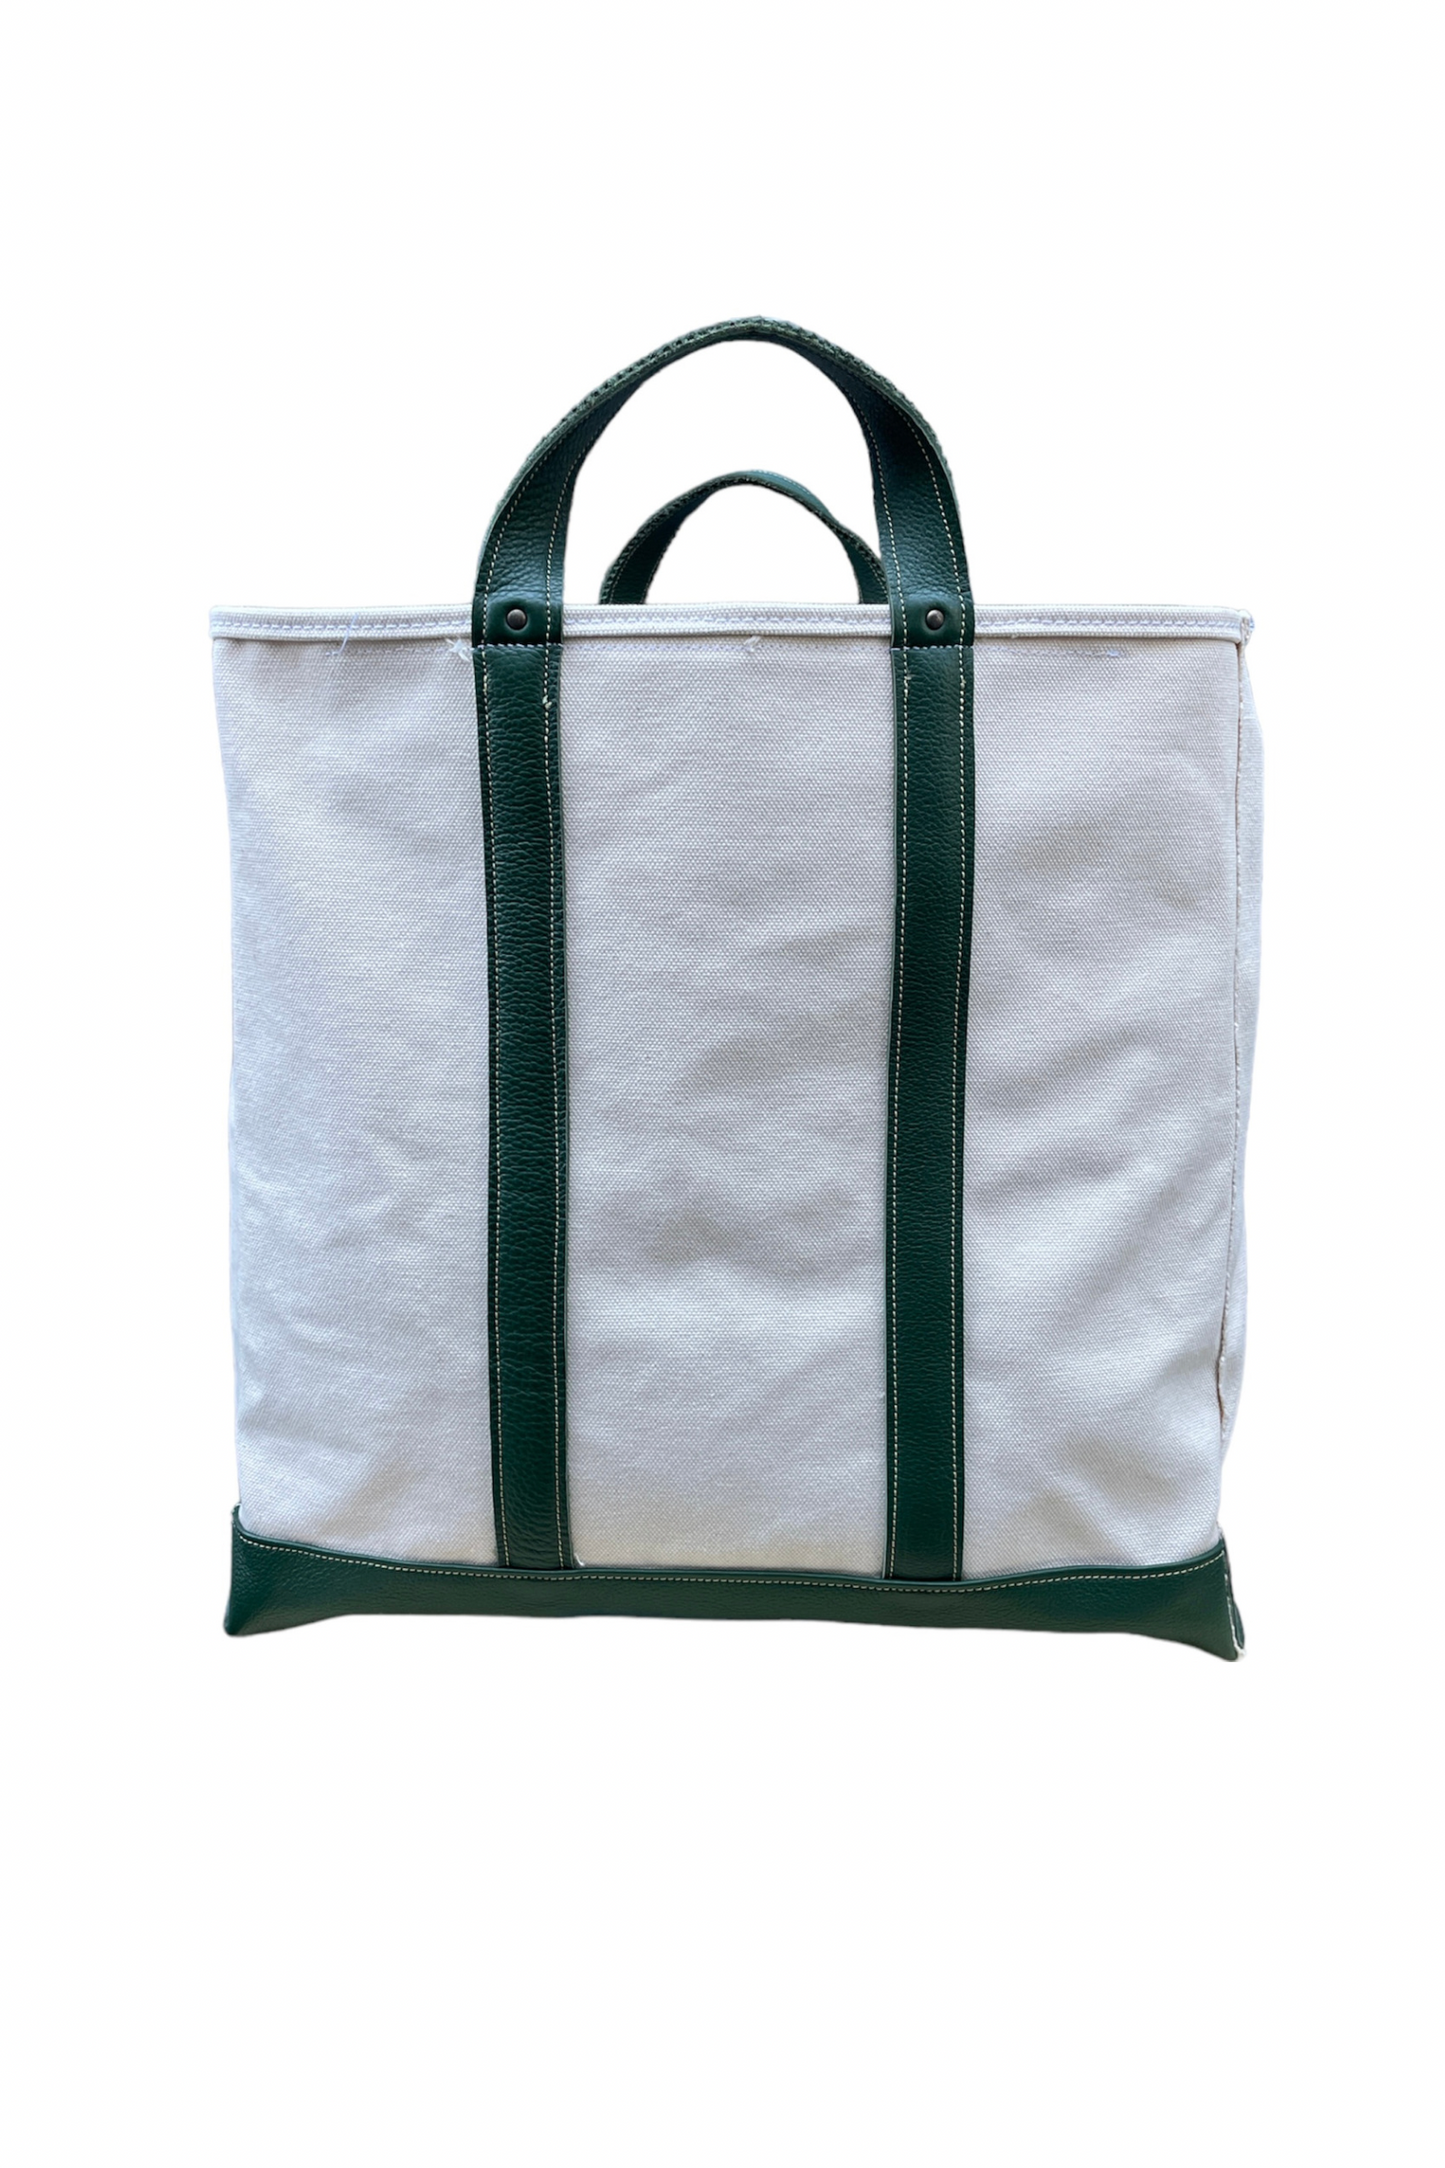 CANVAS BAG with LEATHER